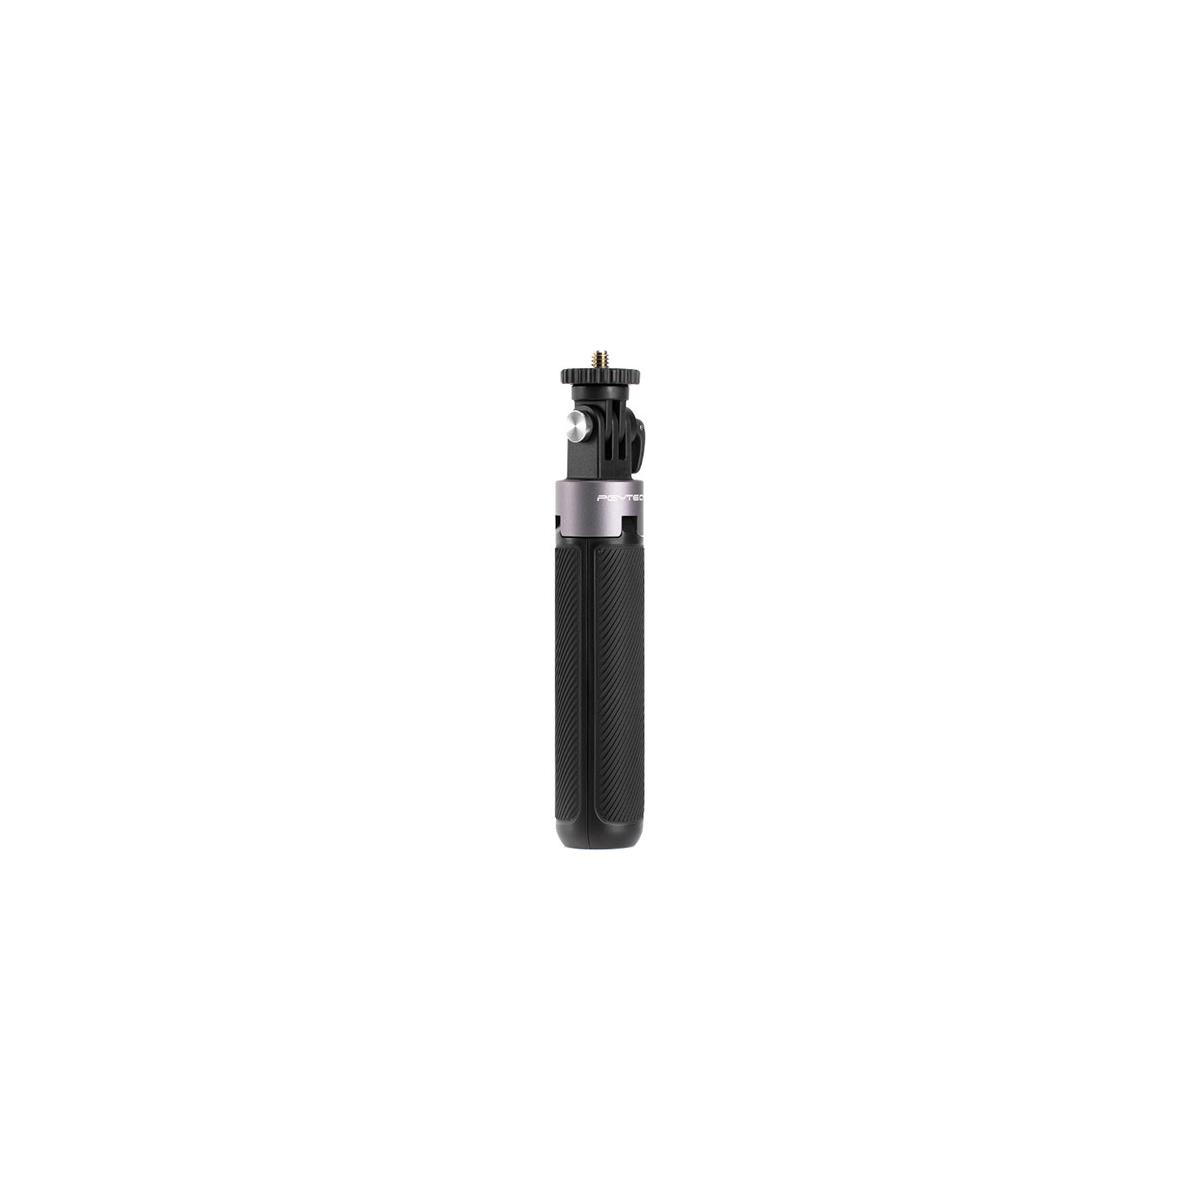 Image of PGYTECH Action Camera Extension Pole Mini Tripod for Action Cameras